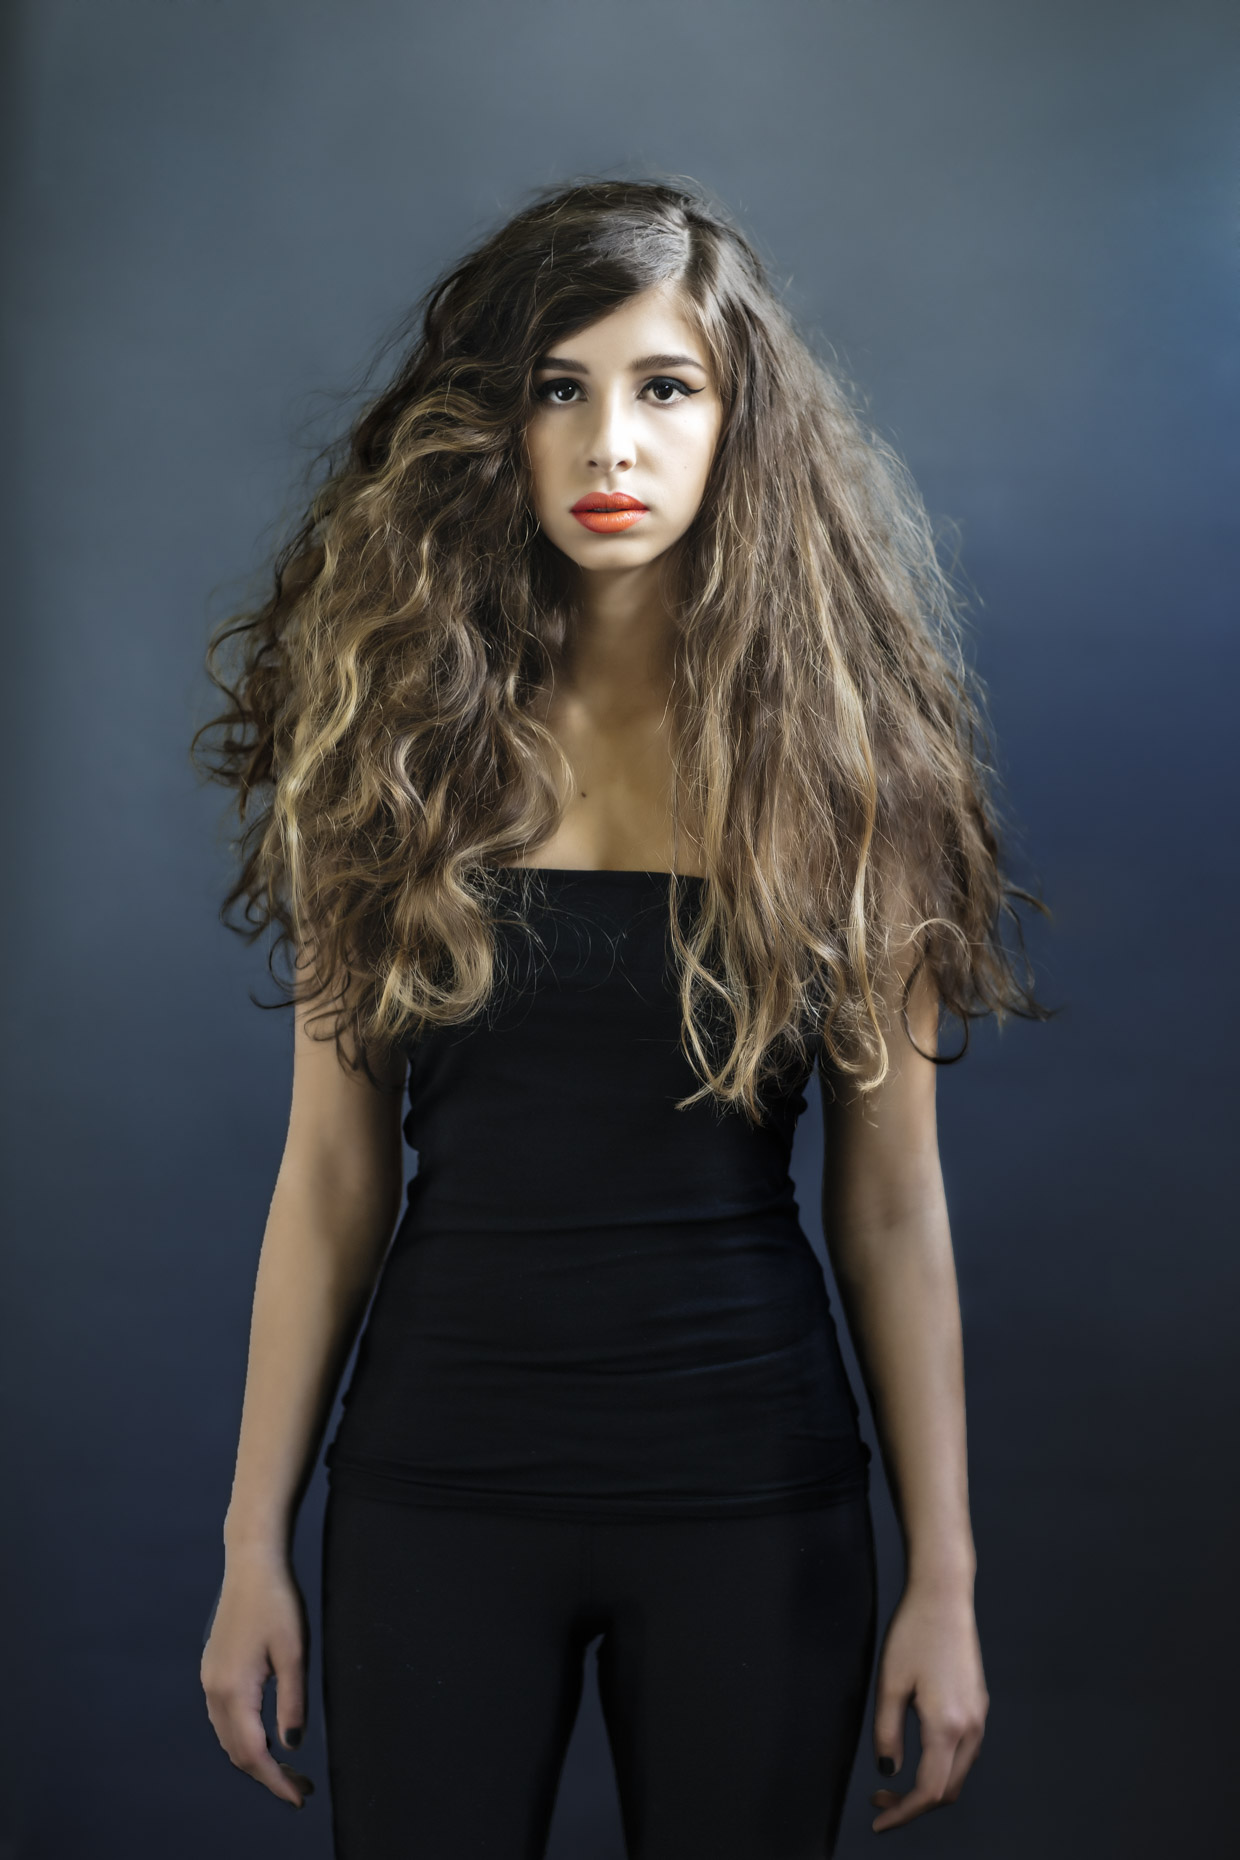 Portrait of woman with big long hair dressed in all black